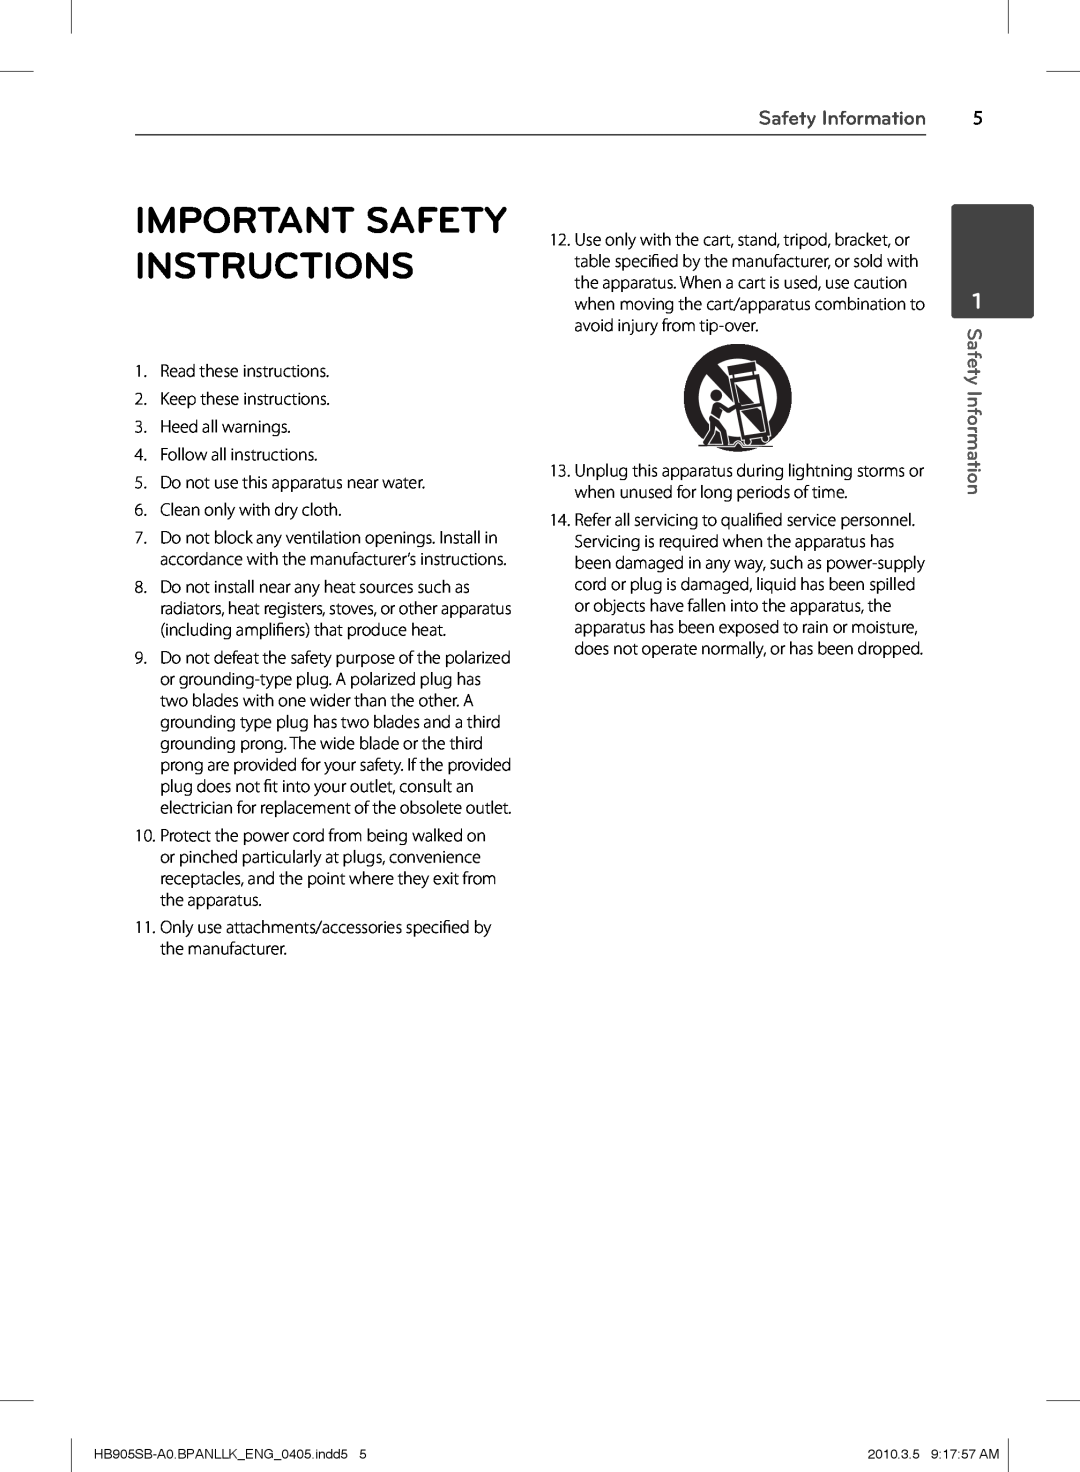 LG Electronics HB905SB Important Safety Instructions, Safety Information, Read these instructions, Follow all instructions 